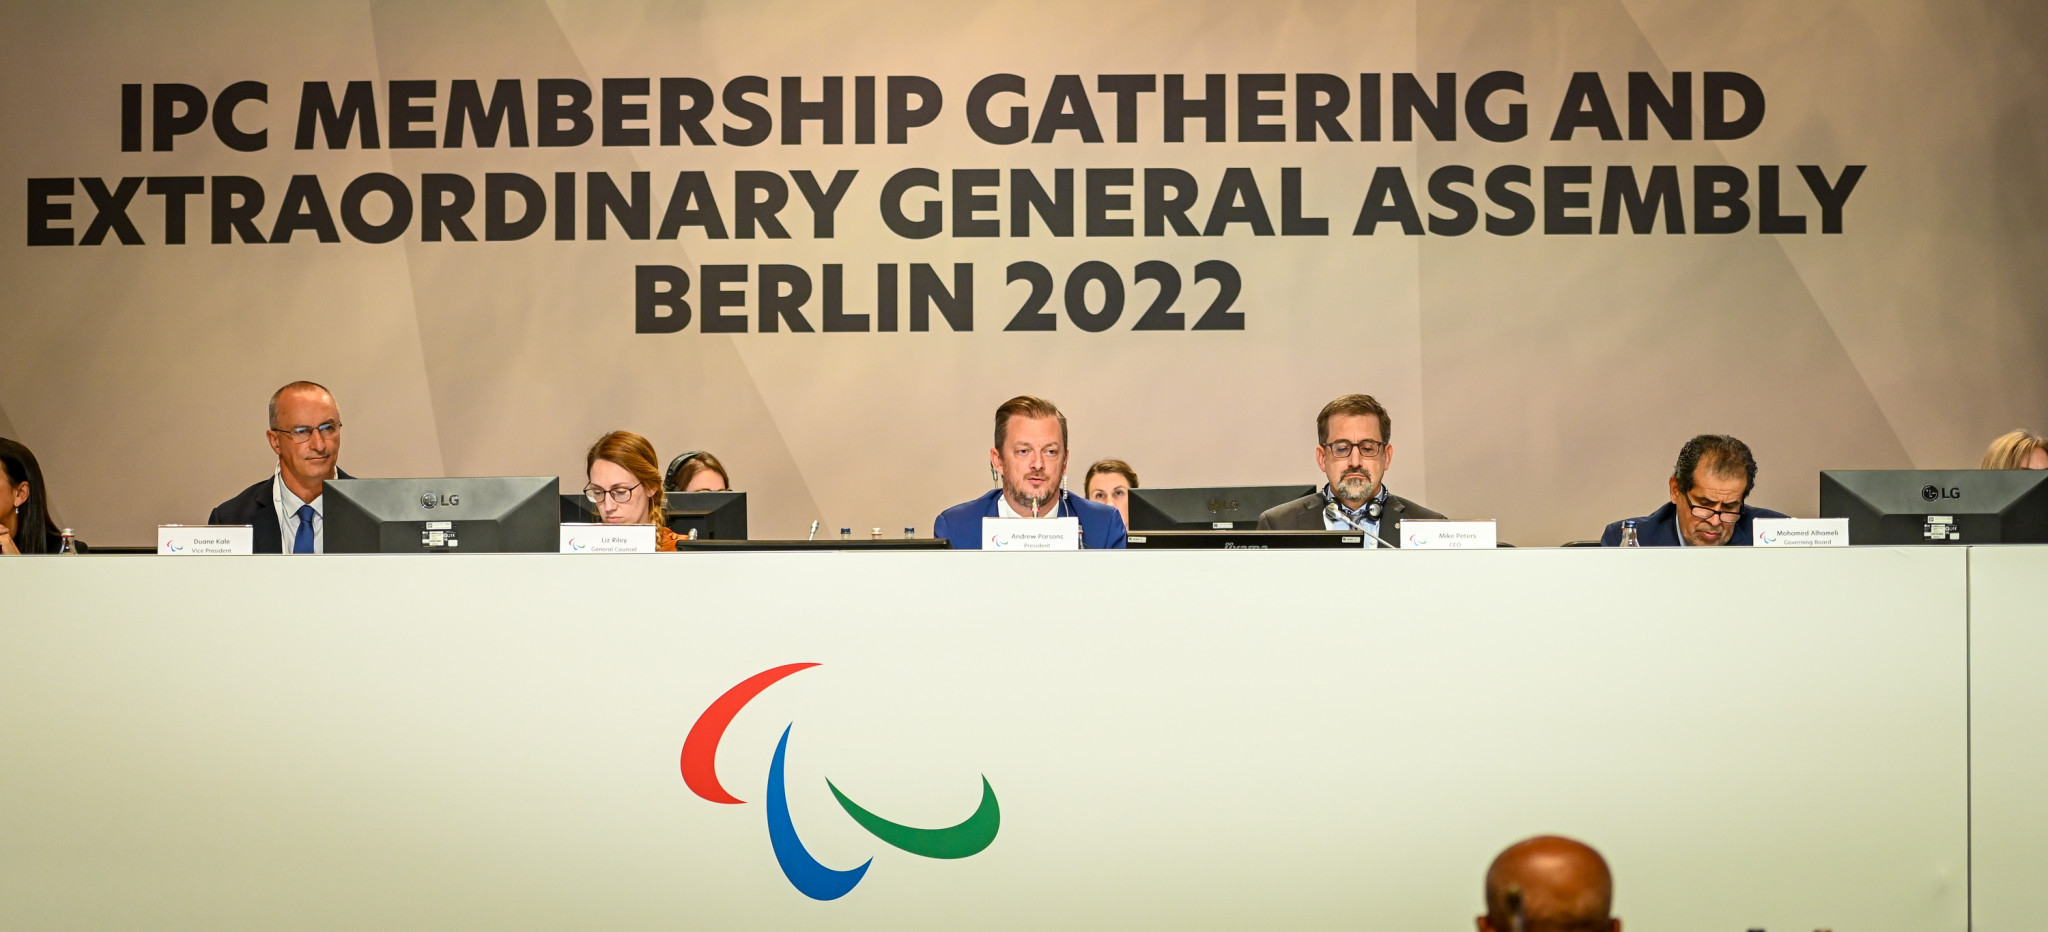 The IPC General Assembly voted by 54 votes to 45 to suspend the NPC of Belarus ©IPC